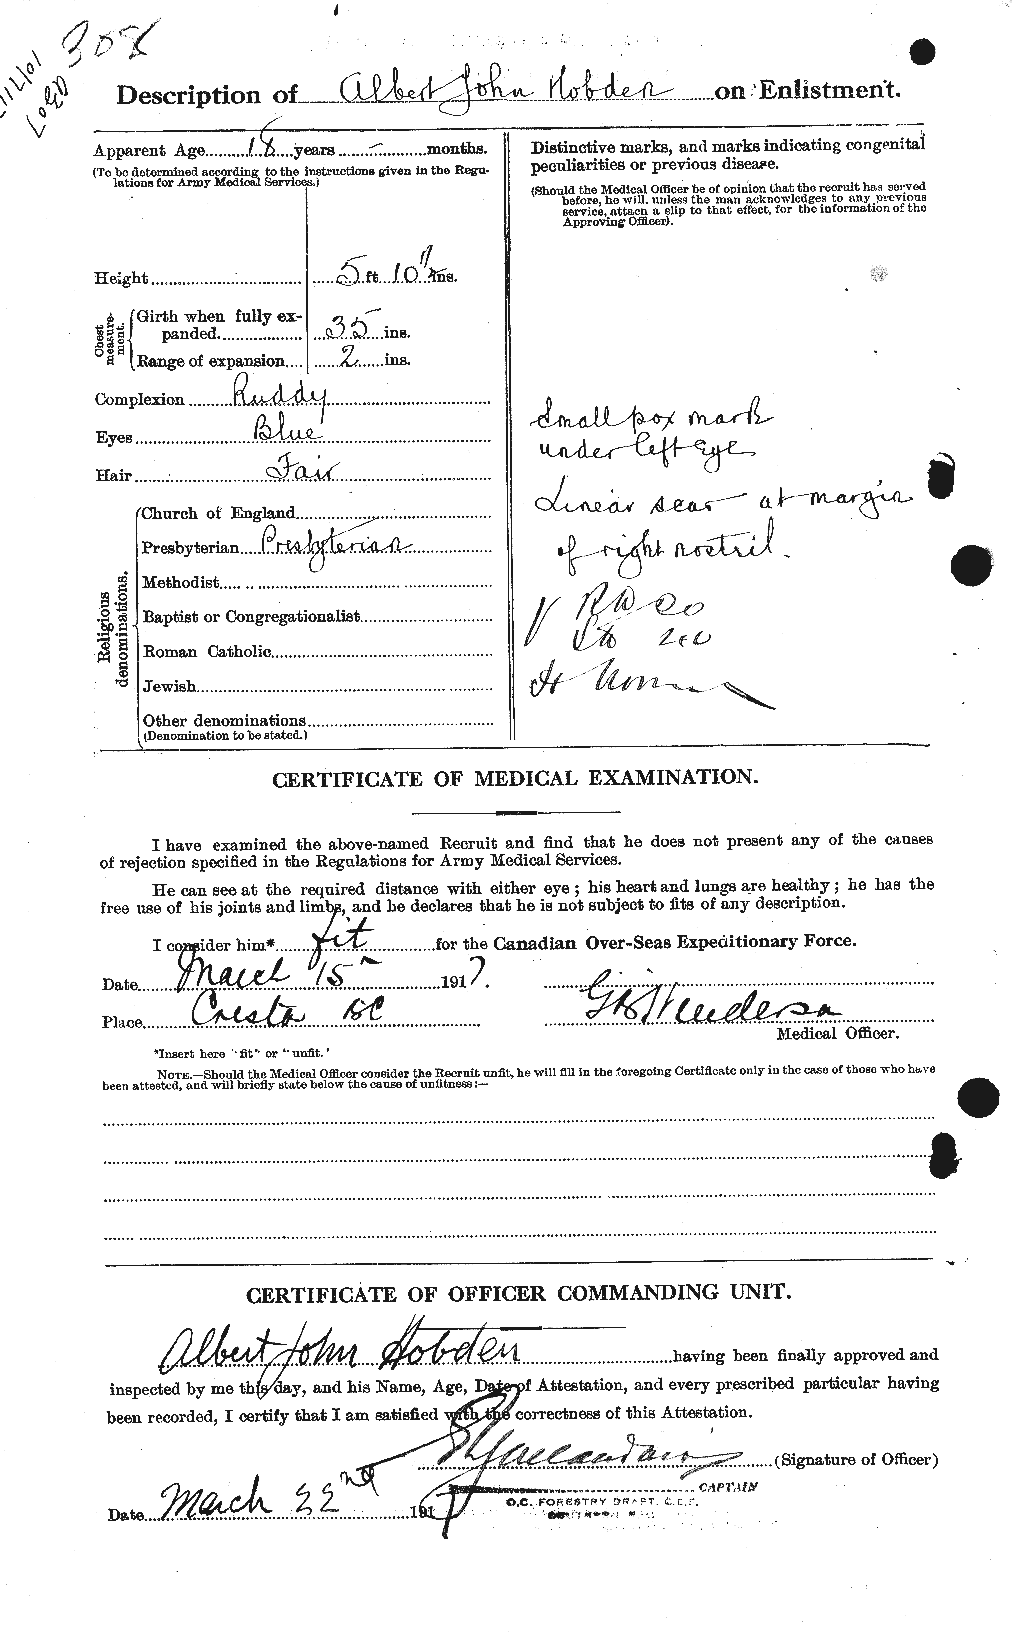 Personnel Records of the First World War - CEF 397533b